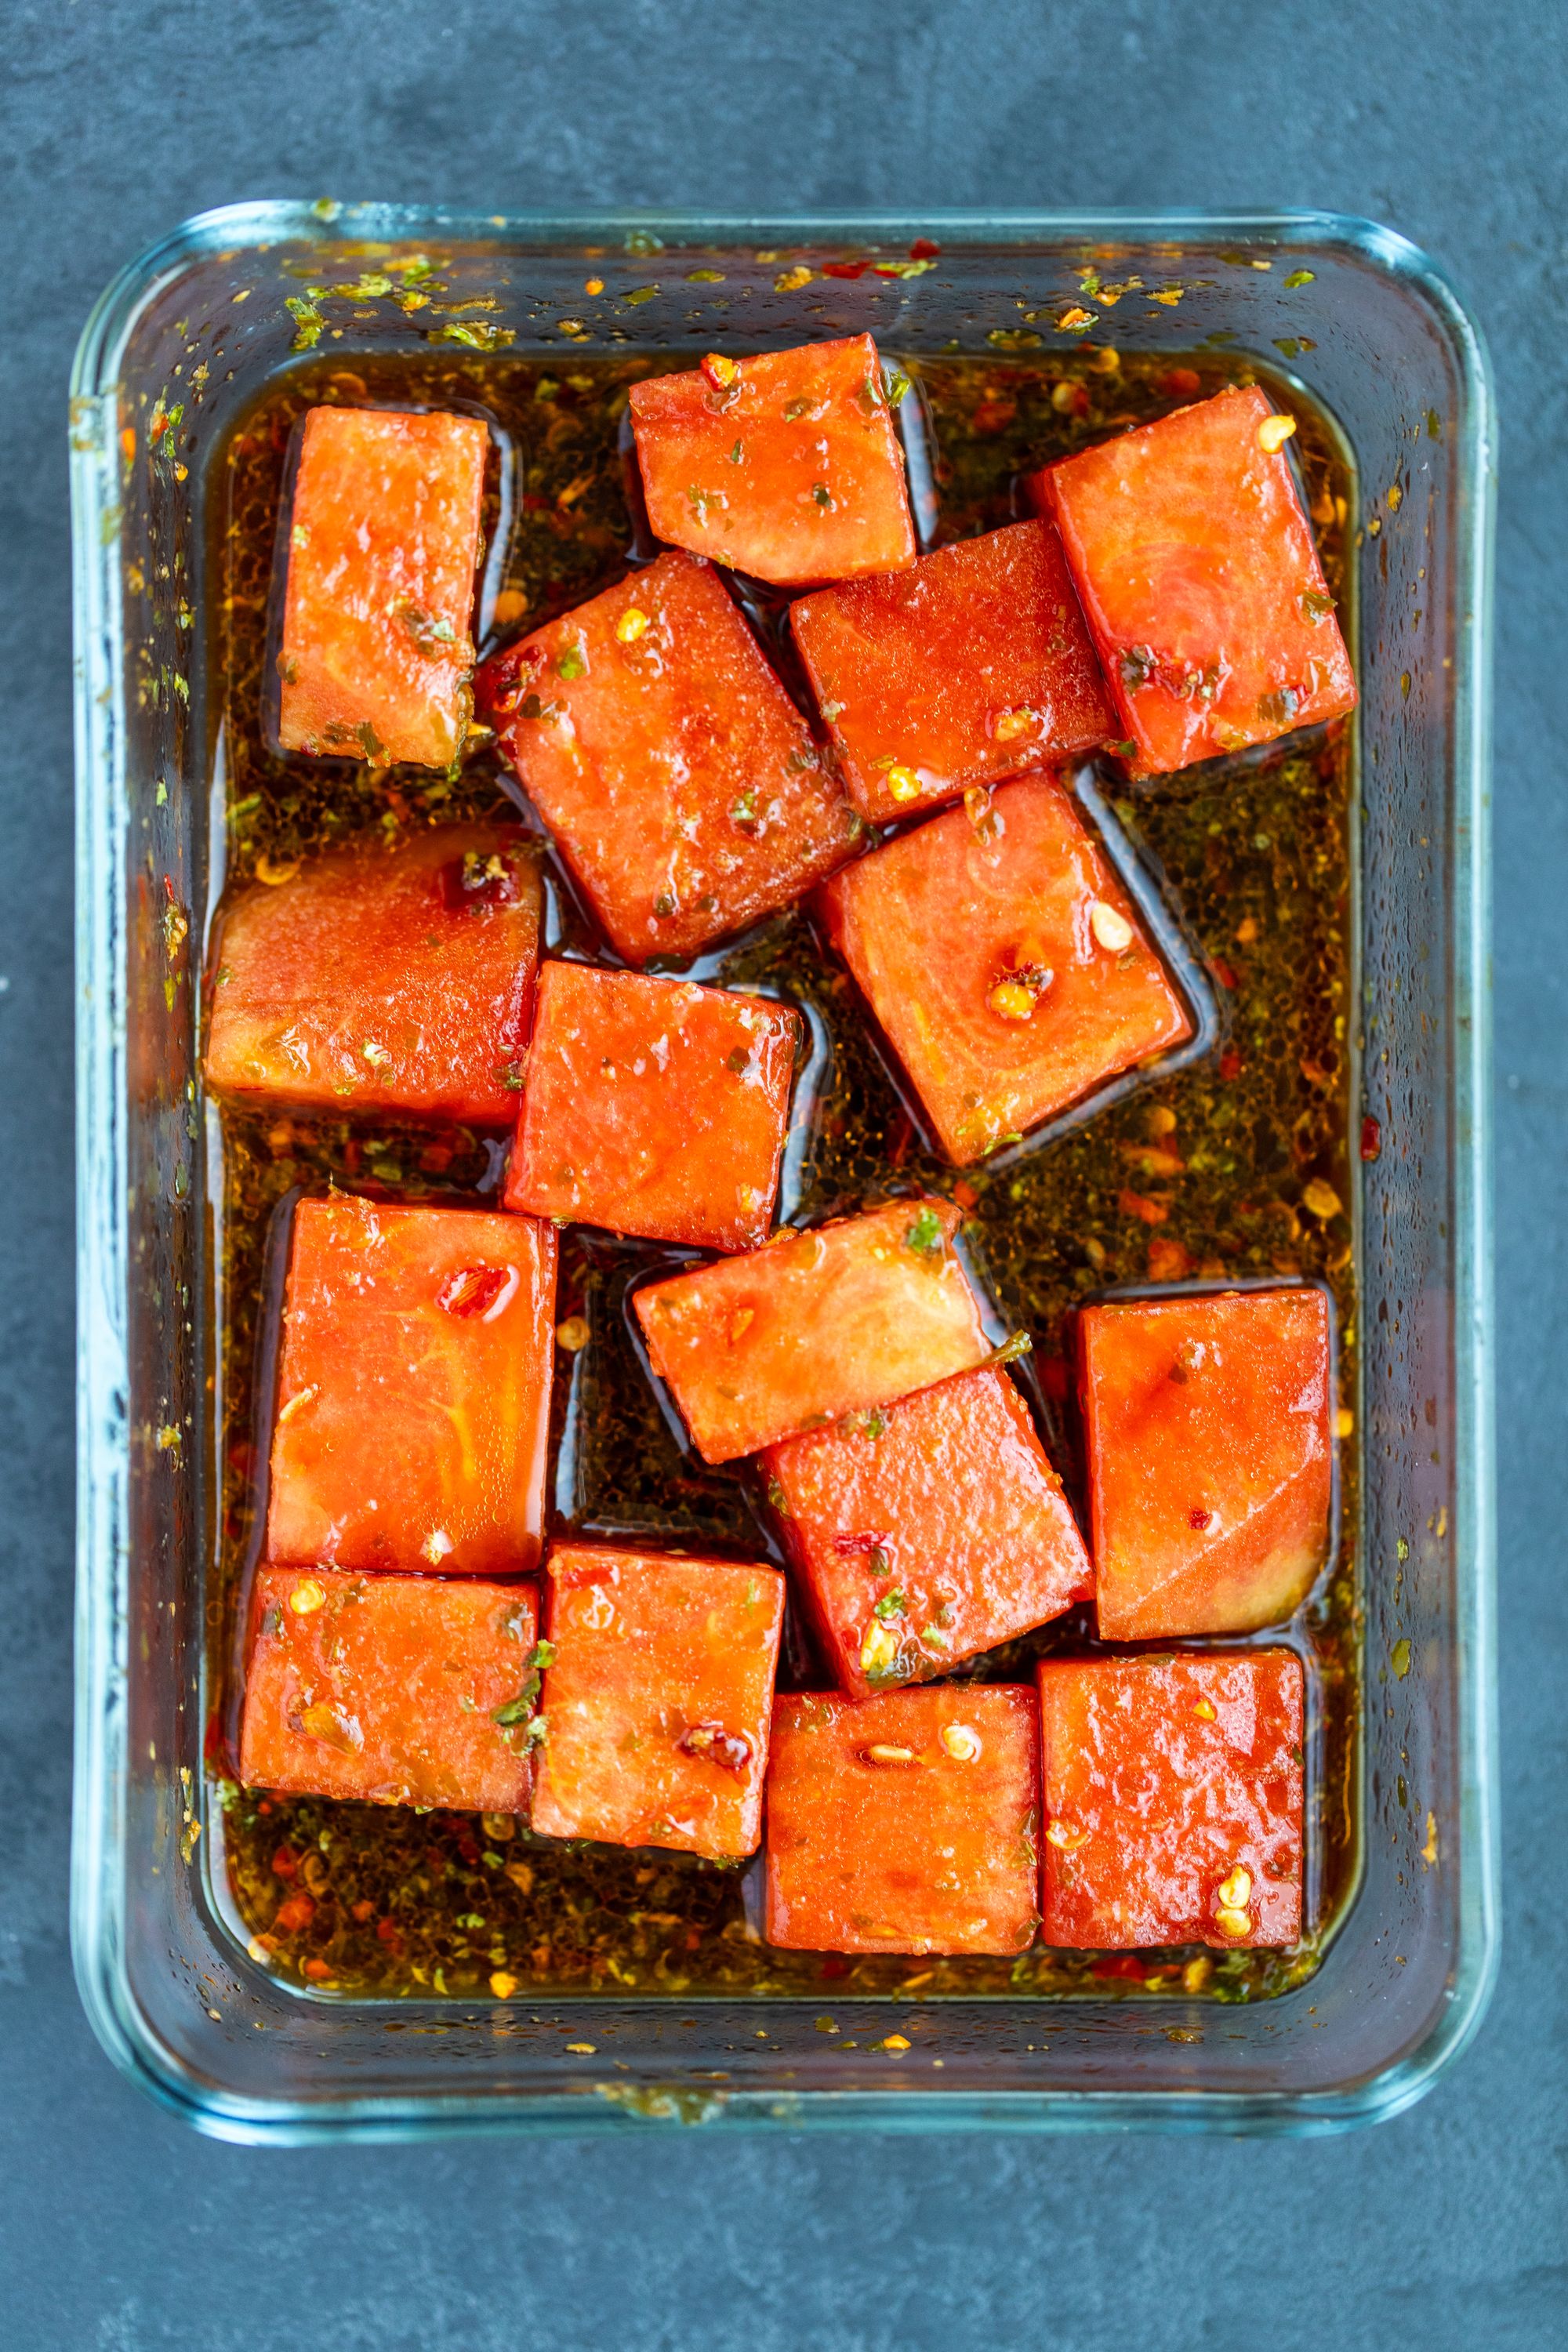 Watermelon marinating in a glass dish before being dehydrated into 'tuna'